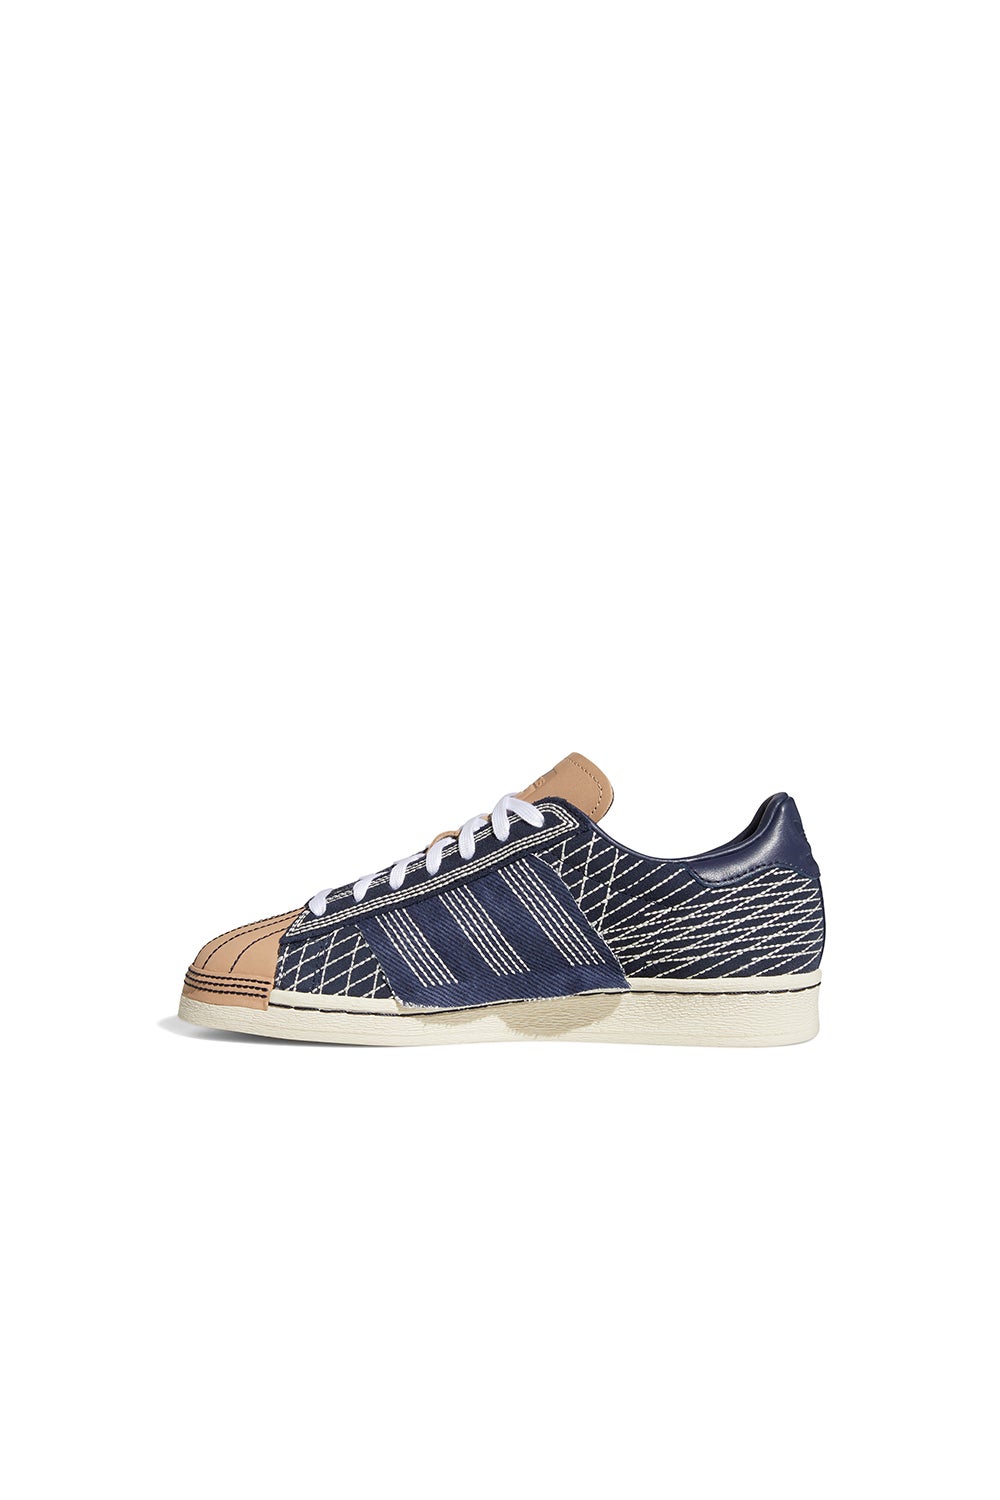 adidas Superstar 82 Shoes Shadow Navy